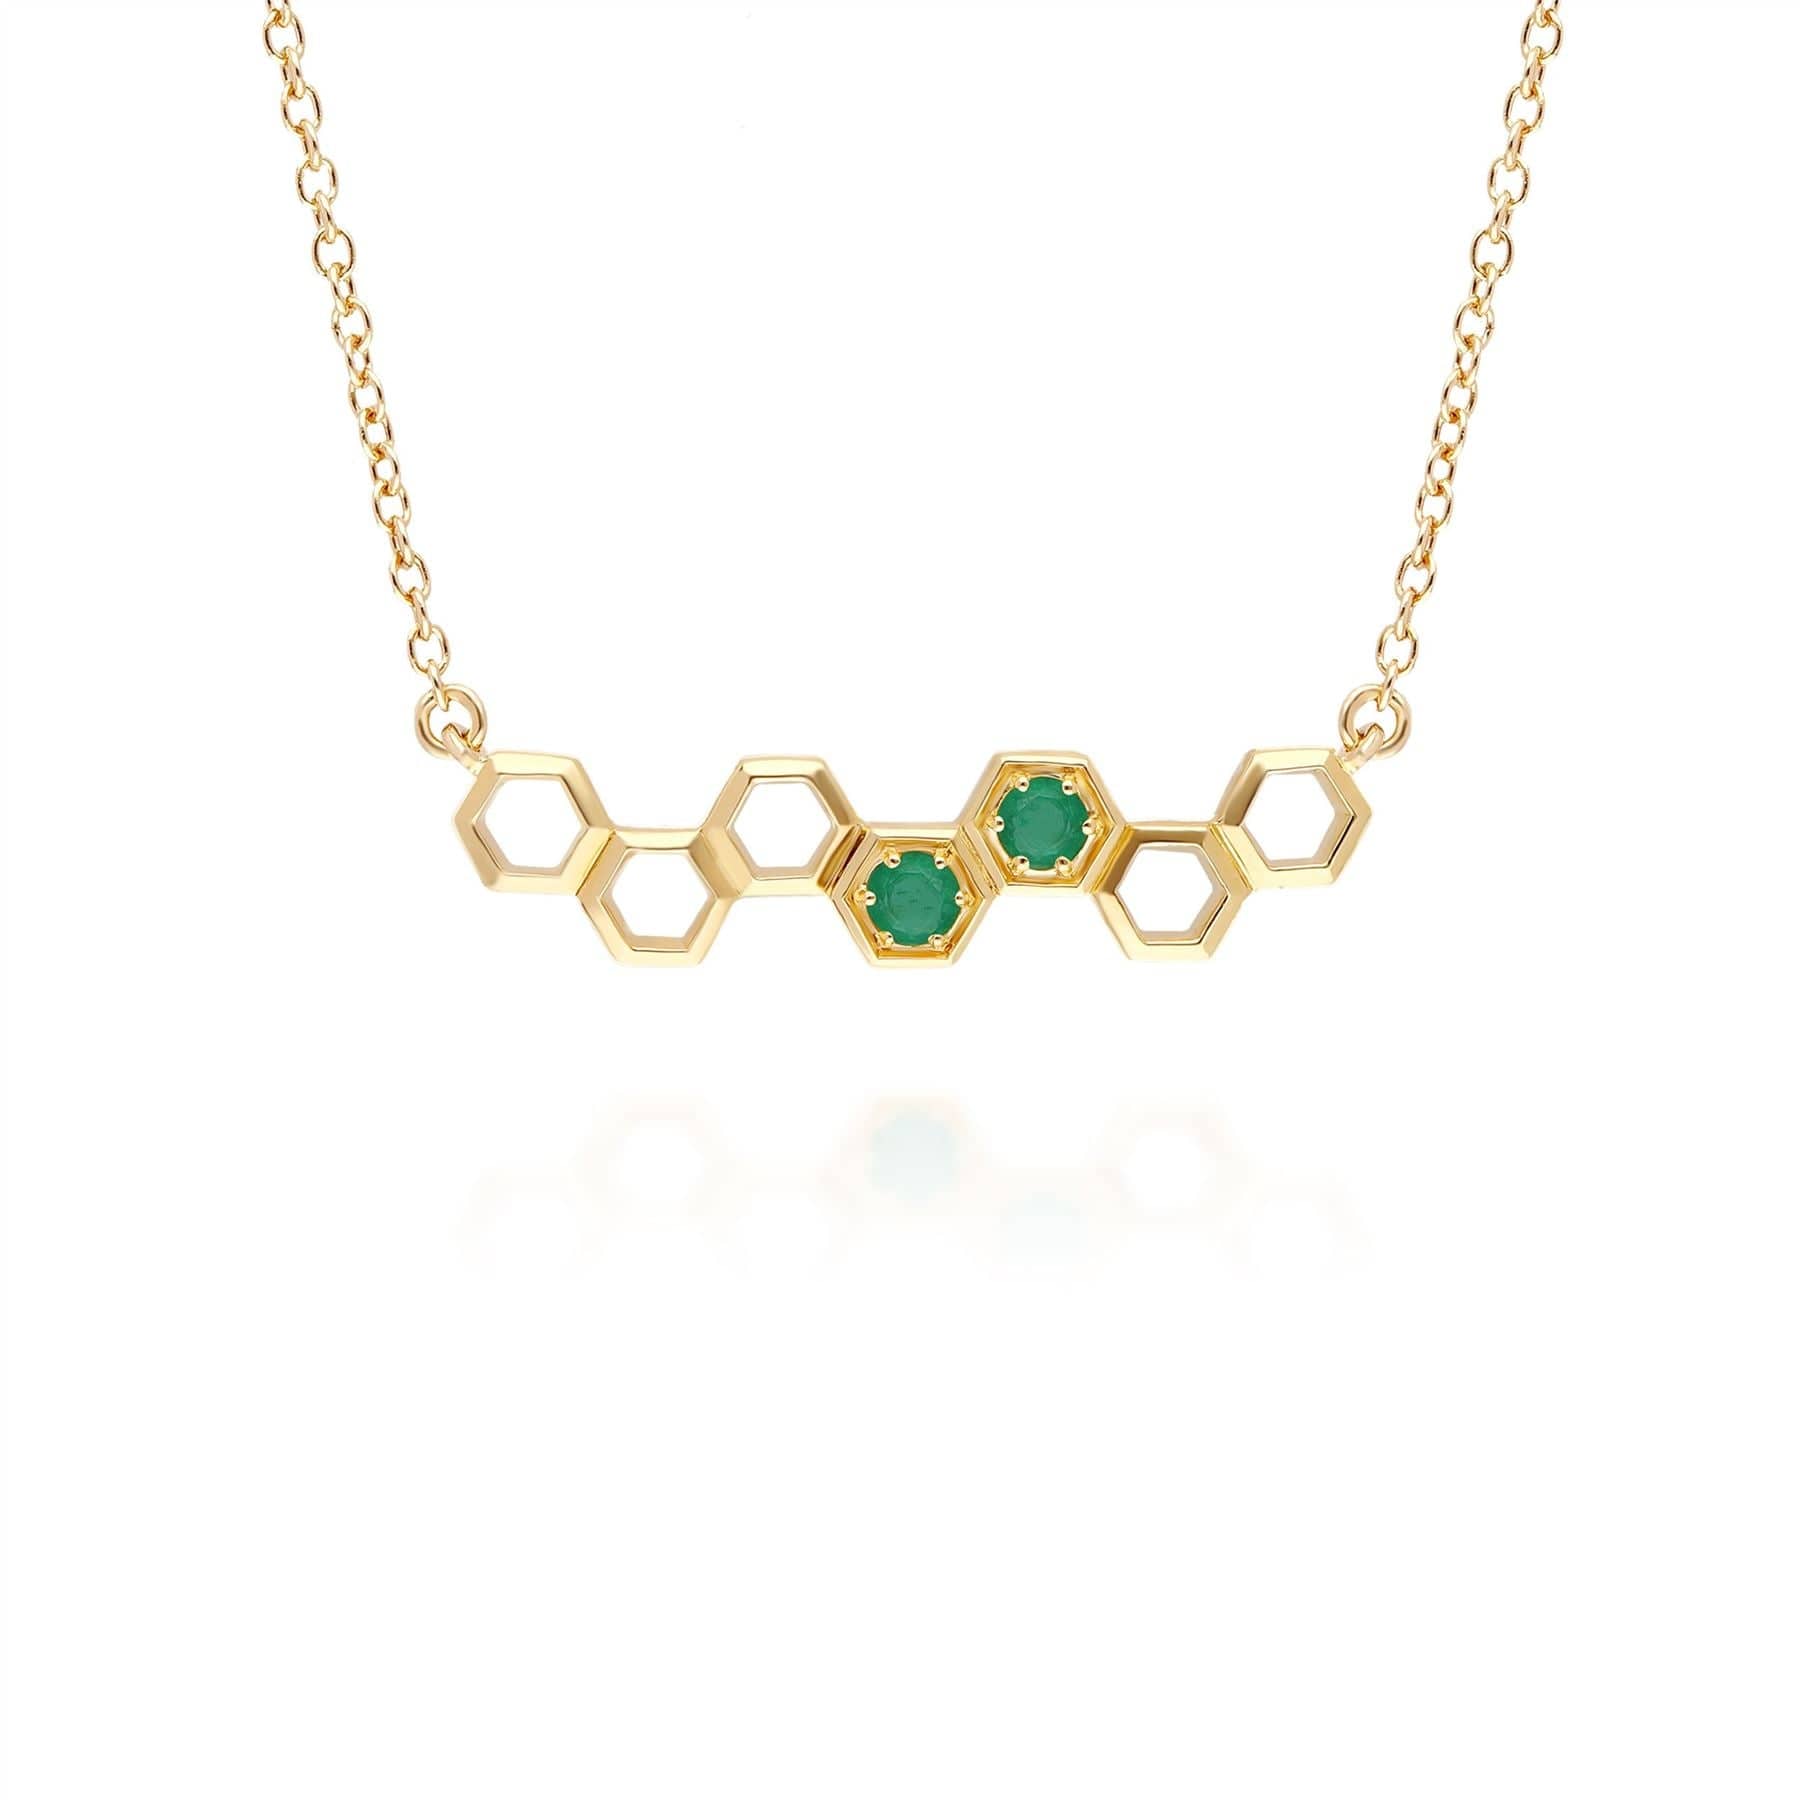 Photos - Pendant / Choker Necklace Honeycomb Inspired Emerald Link Necklace in 9ct Yellow Gold